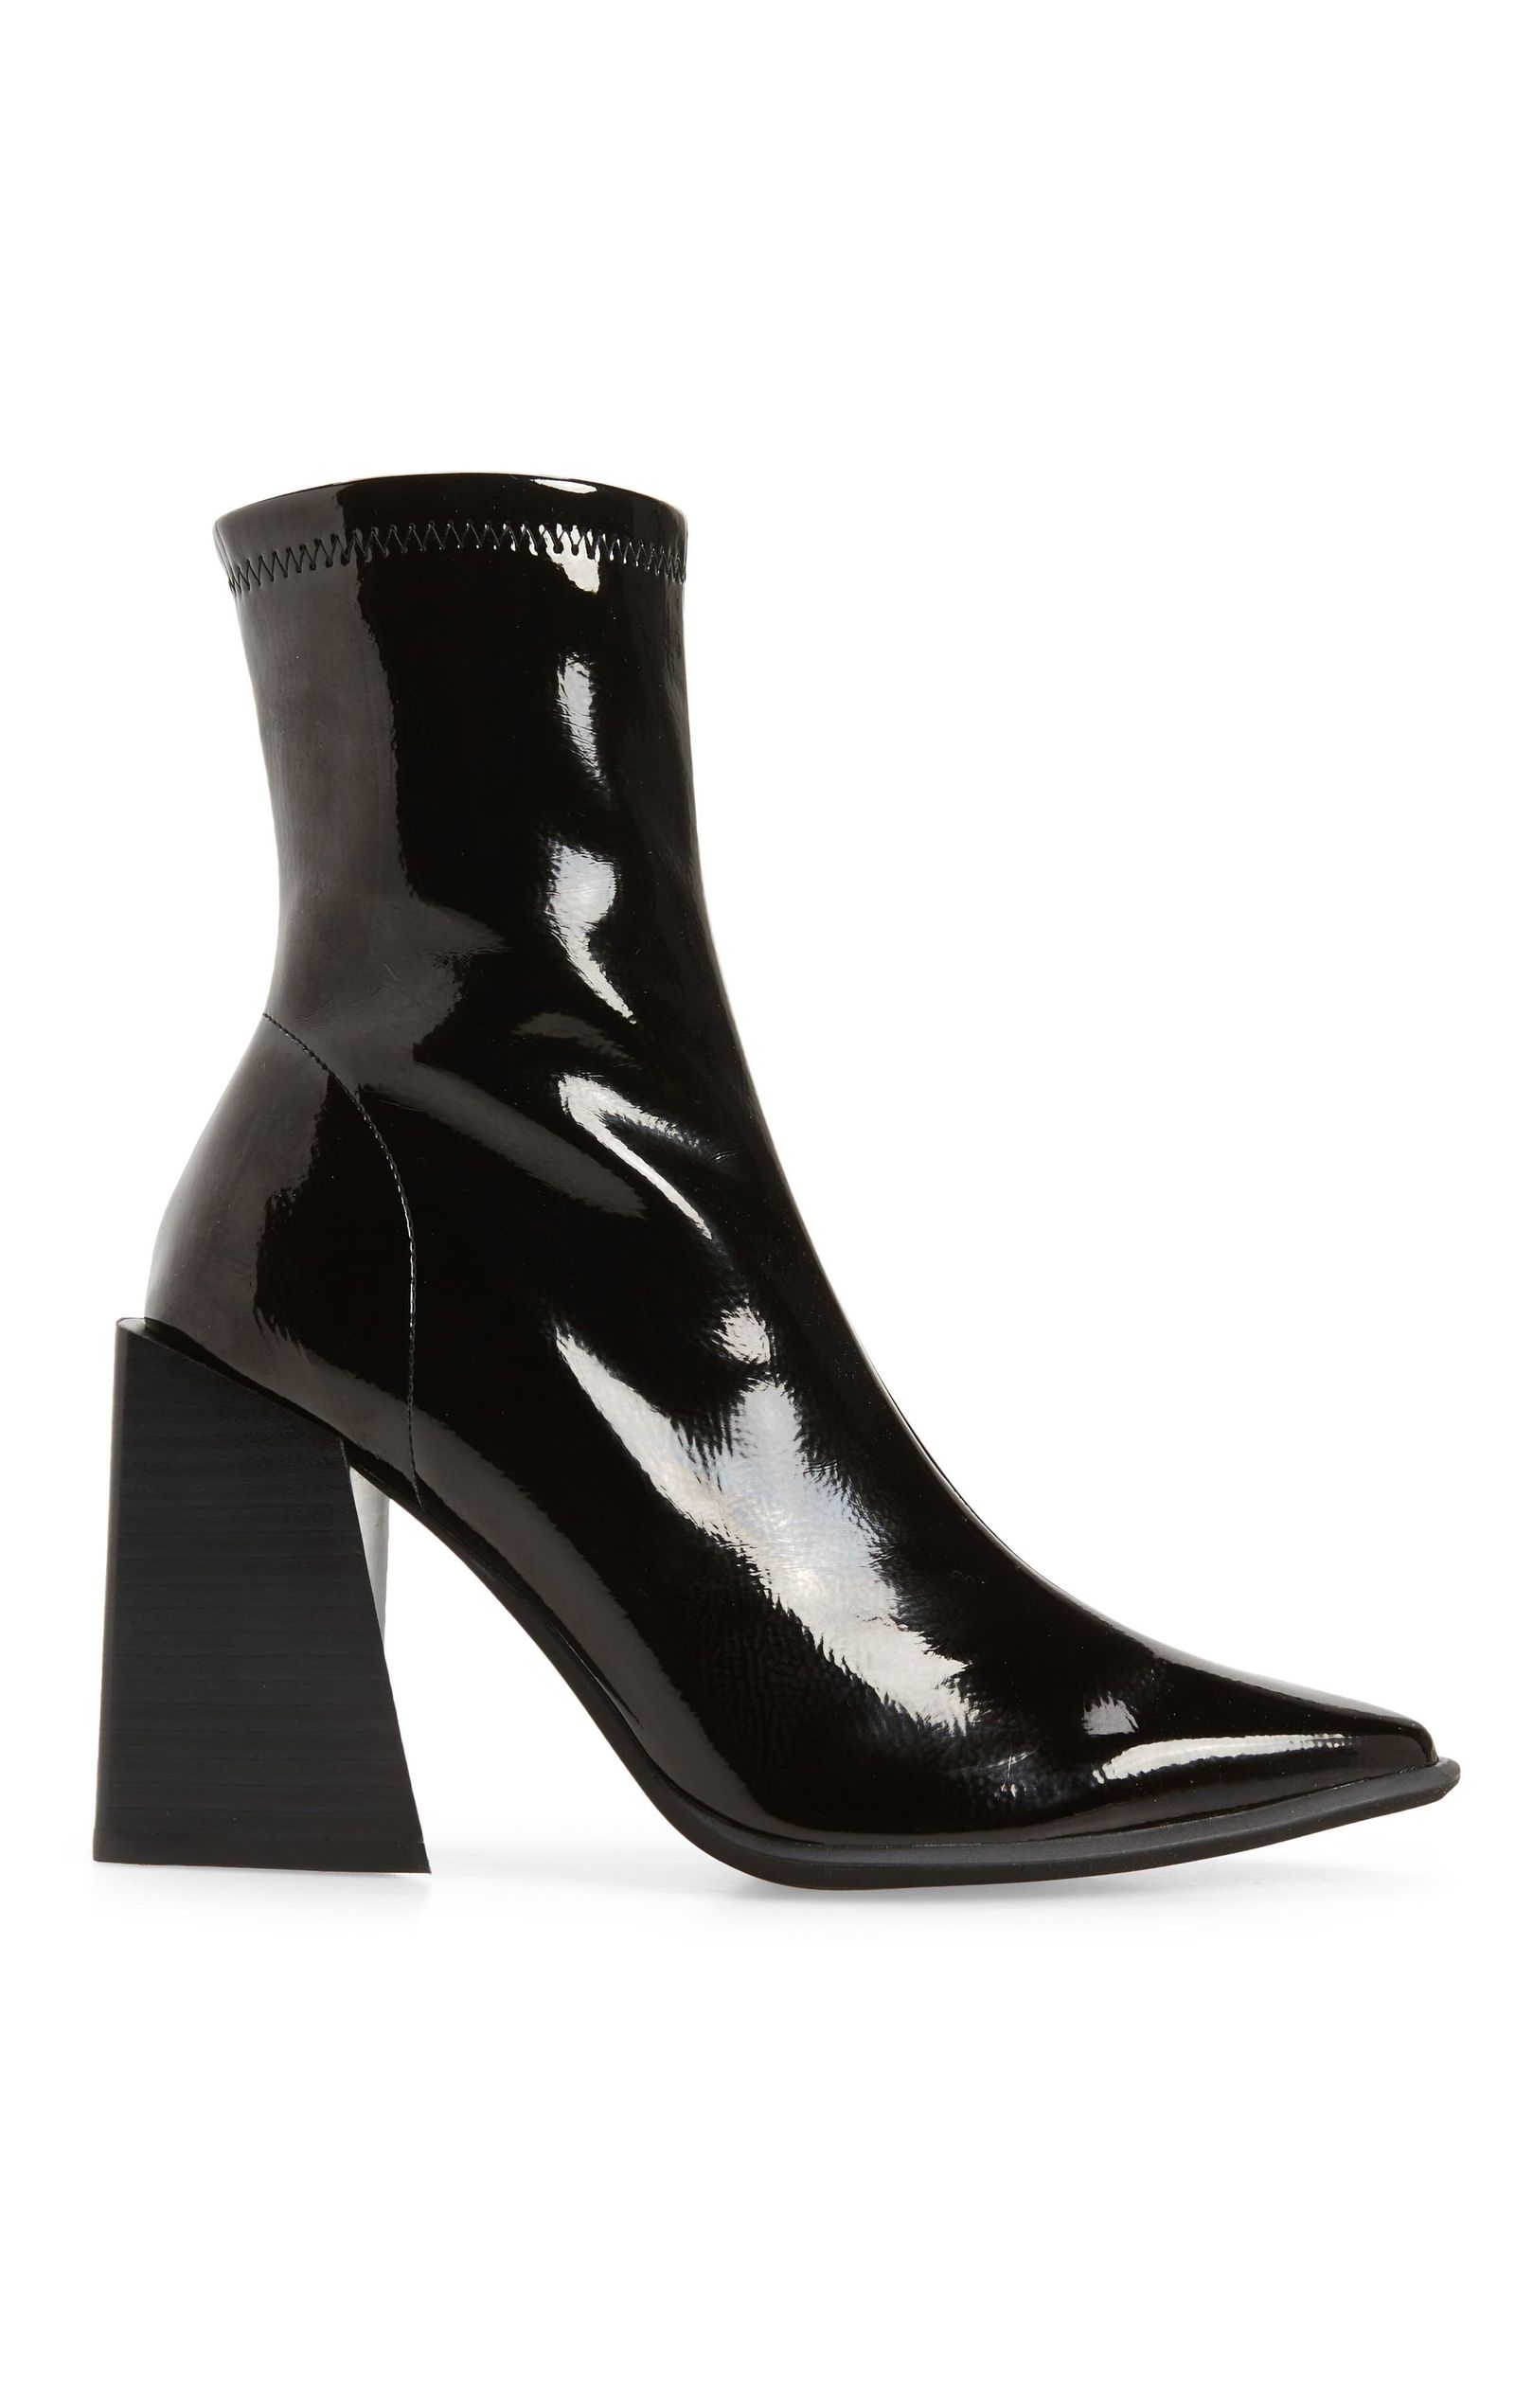 30 New Boots From Steve Madden and Jeffrey Campbell | Who What Wear